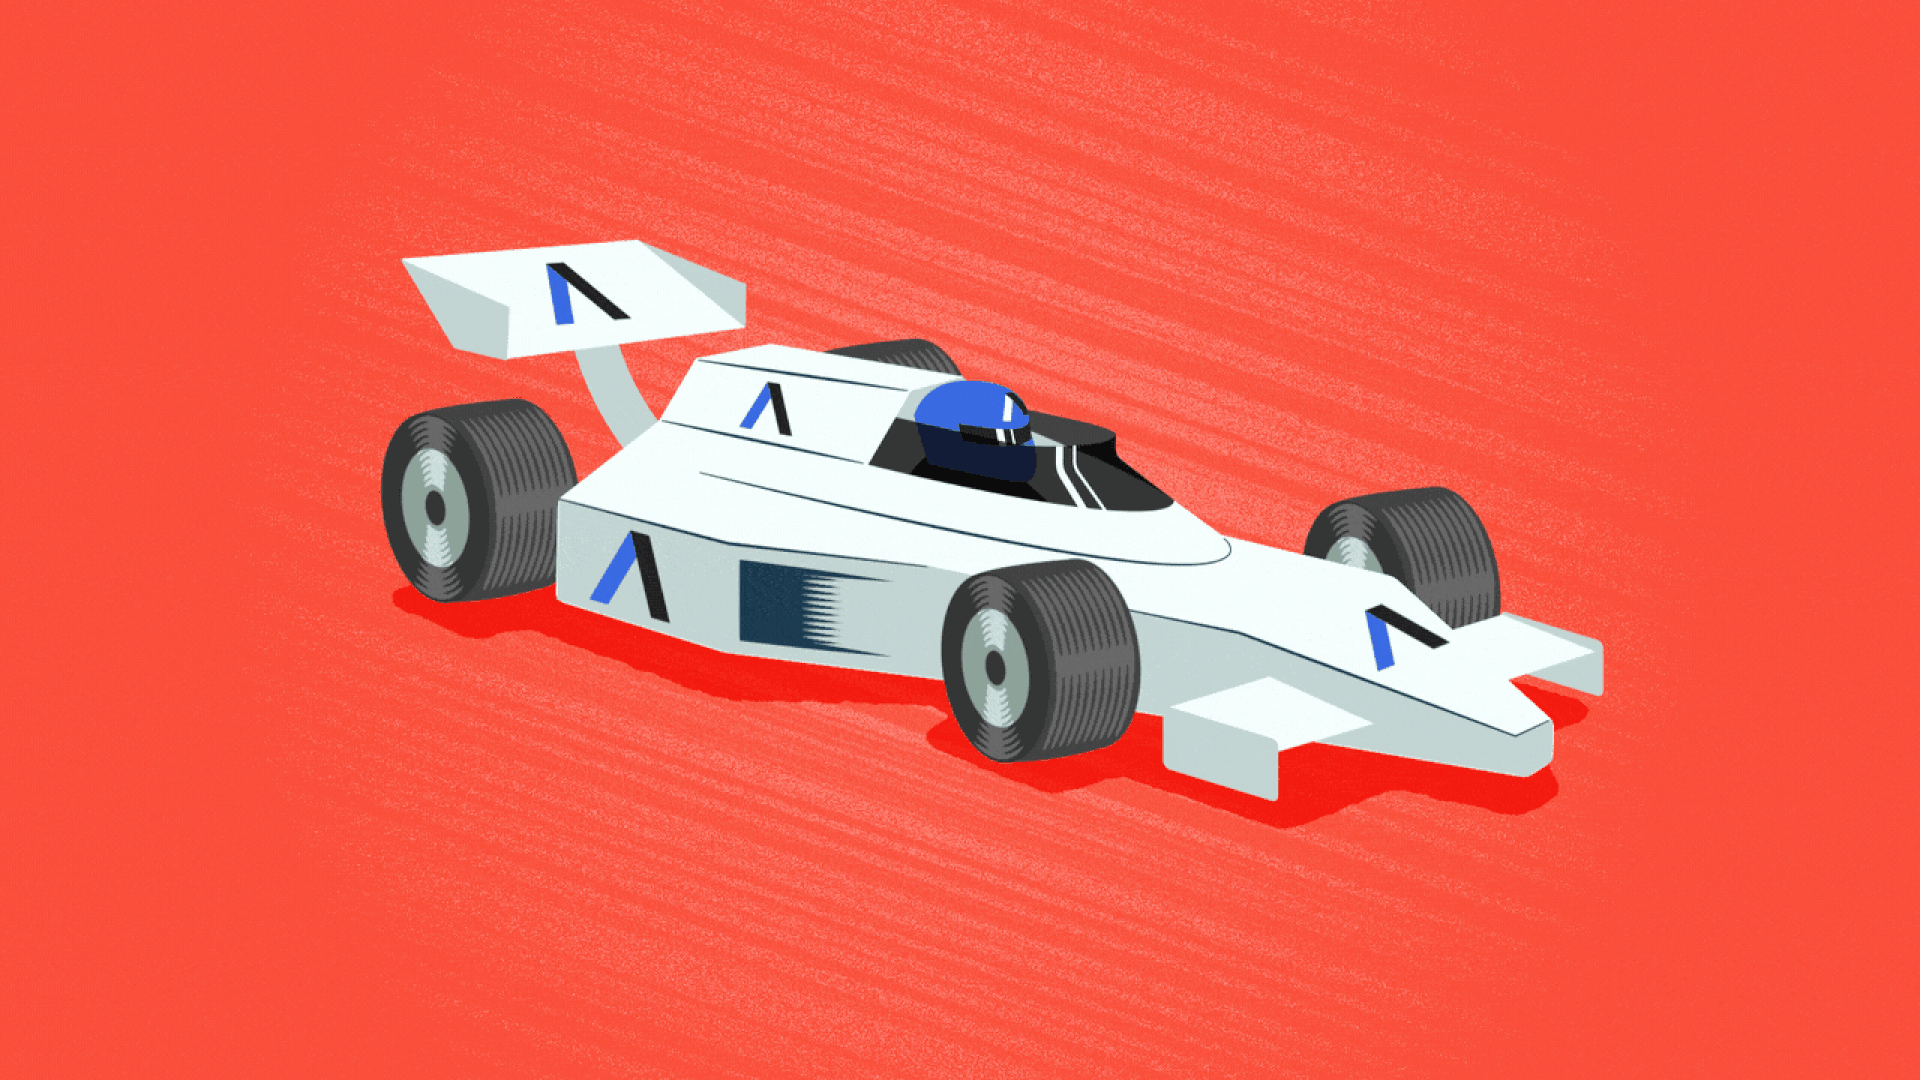 Illustration of a race car covered with Axios logos driving.